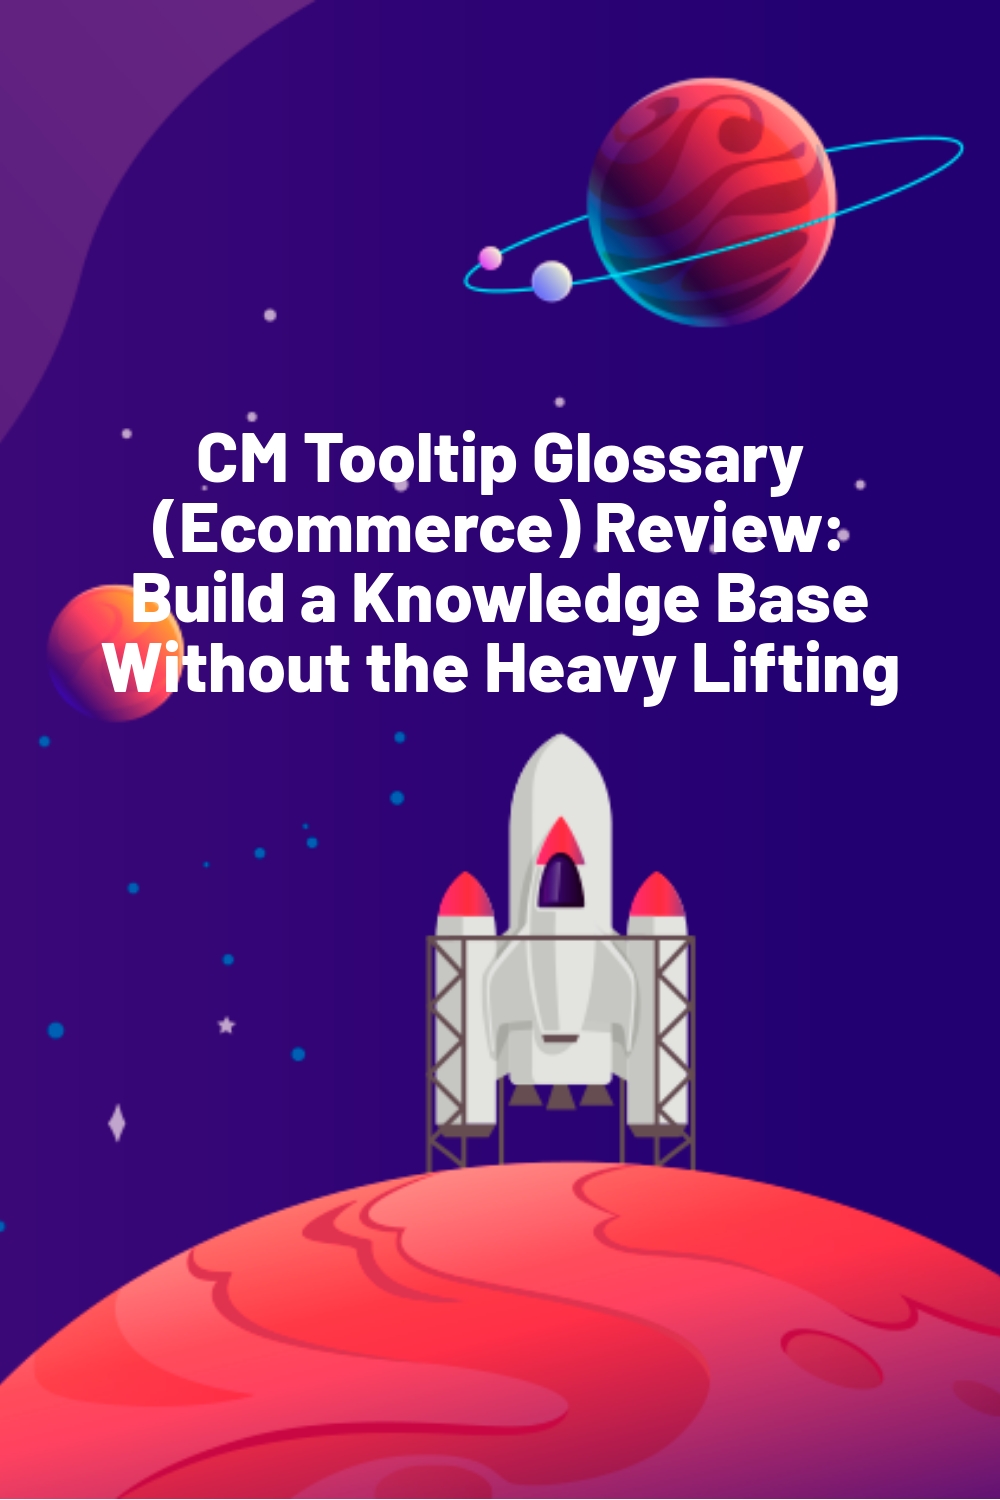 CM Tooltip Glossary (Ecommerce) Review: Build a Knowledge Base Without the Heavy Lifting